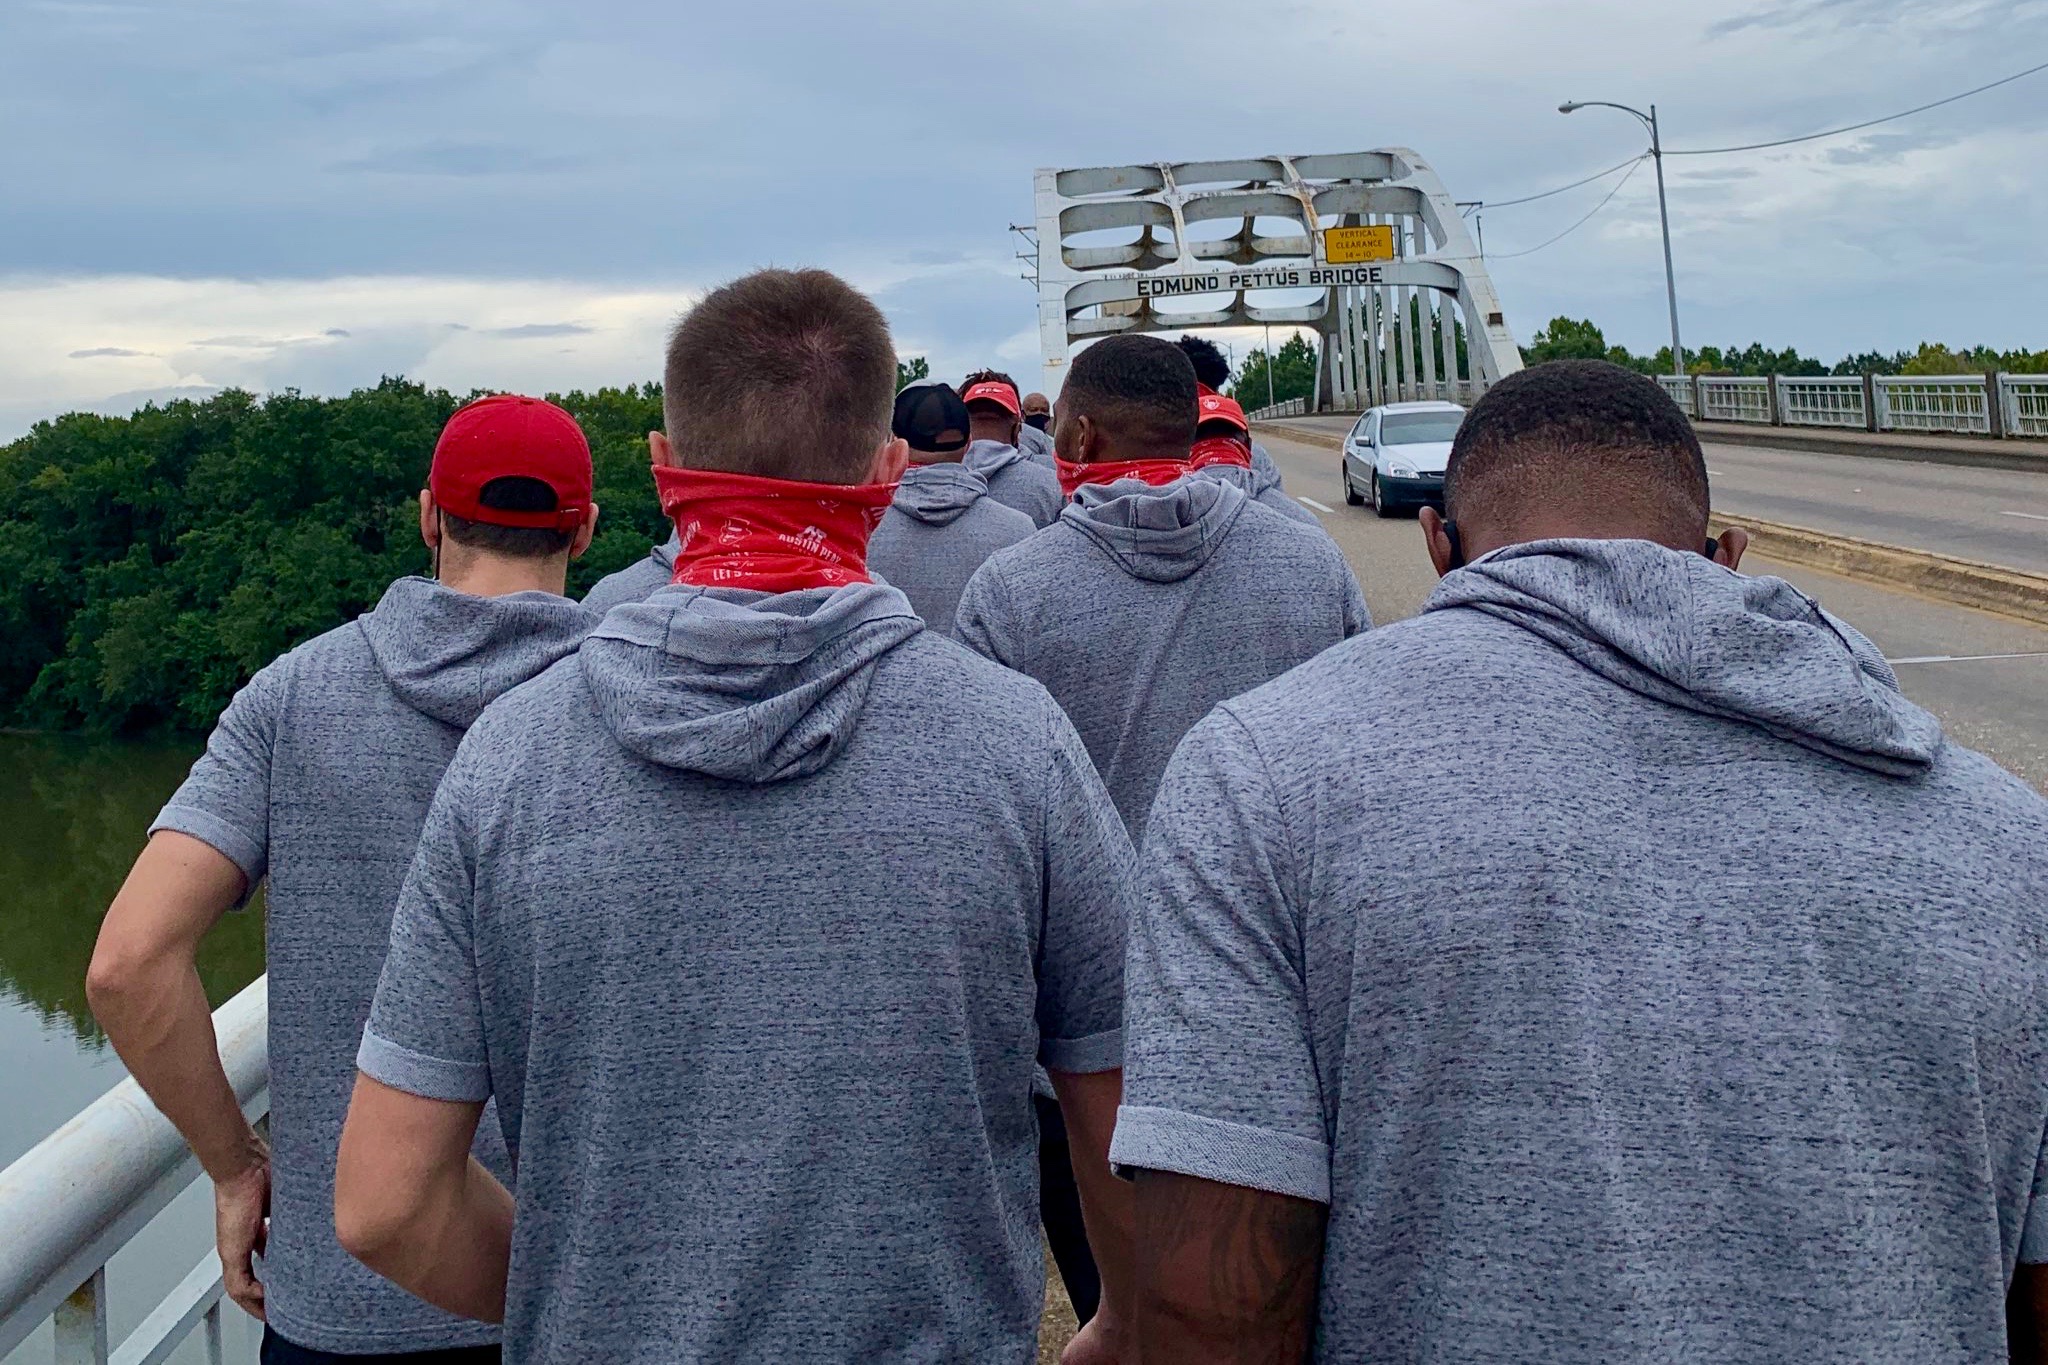 Members of Austin Peay’s football team on Friday, Aug. 28, made a special stop in Selma, Alabama, to walk across the Edmund Pettus Bridge.  “What a great experience in Selma with our Govs football student athletes!” Austin Peay’s Director of Athletics Gerald Harrison wrote on Twitter. “Also great to have President Dannell Whiteside join us as we walked across the Edmund Pettus Bridge.  “Today we all learned a little more about Good Trouble,” Harrison wrote.  Whiteside, APSU’s interim president, noted in a tweet, “Powerful moment with @GovsFB walking across the Edmund Pettus Bridge!”  USA Today’s Phil Kaplan noted the visit followed in the footsteps of civil rights icon John Lewis, who died July 17. Lewis led a march across the bridge on March 7, 1965, to raise awareness of racial inequities in voting registration. State troopers attacked Lewis and fractured his skull after he crossed the bridge. A photograph of Lewis succumbing to the trooper’s blows is an iconic image of the civil rights movement.  In a June 2018 tweet, Lewis reflected on the continuing fight against racial inequities: “Do not get lost in a sea of despair. Be hopeful, be optimistic. Our struggle is not the struggle of a day, a week, a month, or a year, it is the struggle of a lifetime. Never, ever be afraid to make some noise and get in good trouble, necessary trouble.”  The football team’s visit to the bridge came a day before their game against Central Arkansas in the 2020 Guardian Credit Union FCS Kickoff in Montgomery, Alabama. The game was the first college football game of the season and received a national audience during primetime on ESPN. After opening the game with a 75-yard touchdown, the Govs lost on a last-minute touchdown, 24-17.